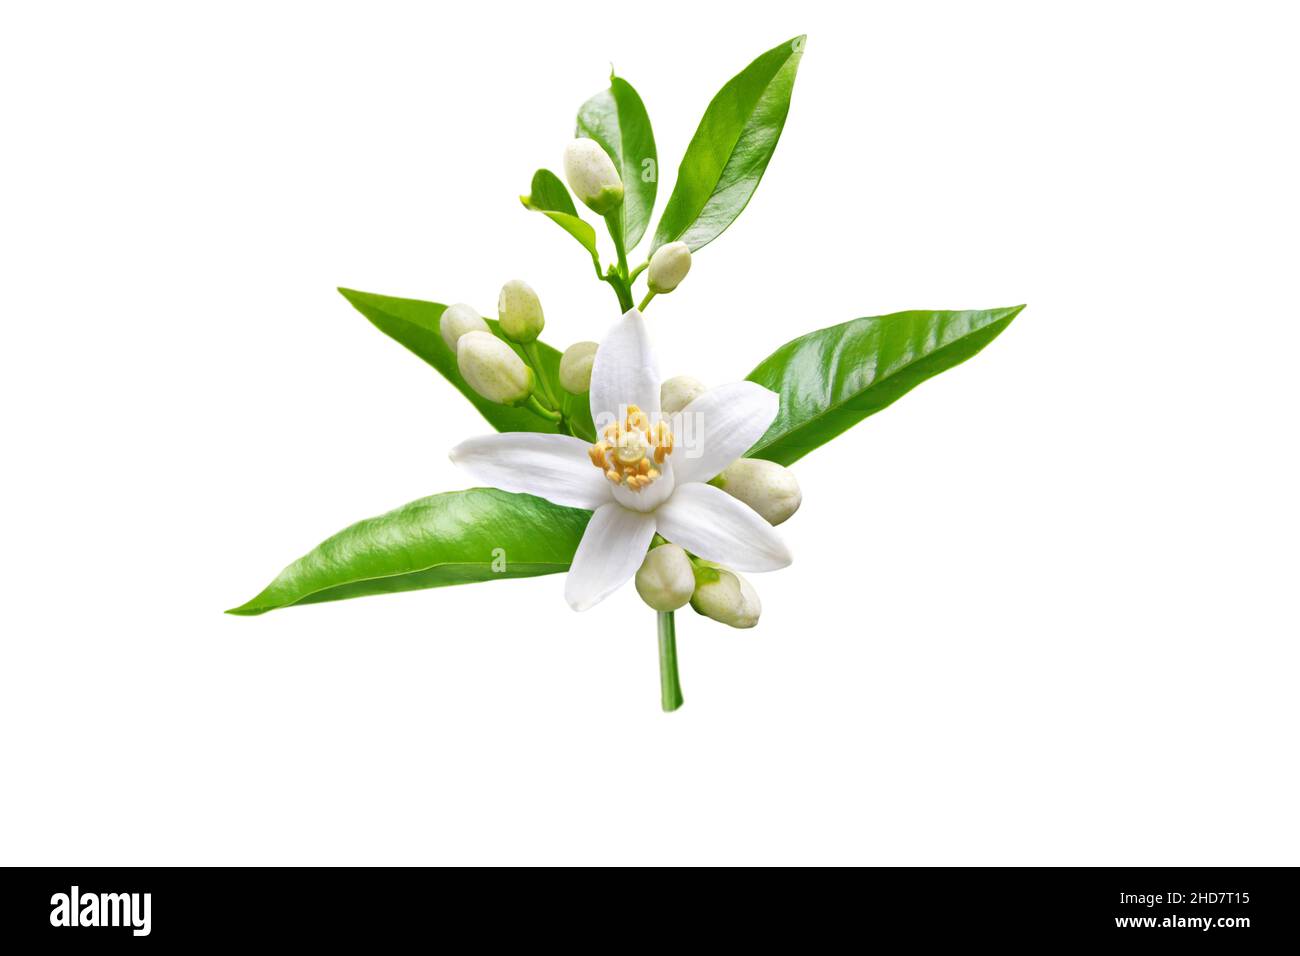 Orange blossom branch with white flowers, buds and leaves isolated on white. Neroli citrus bloom. Stock Photo